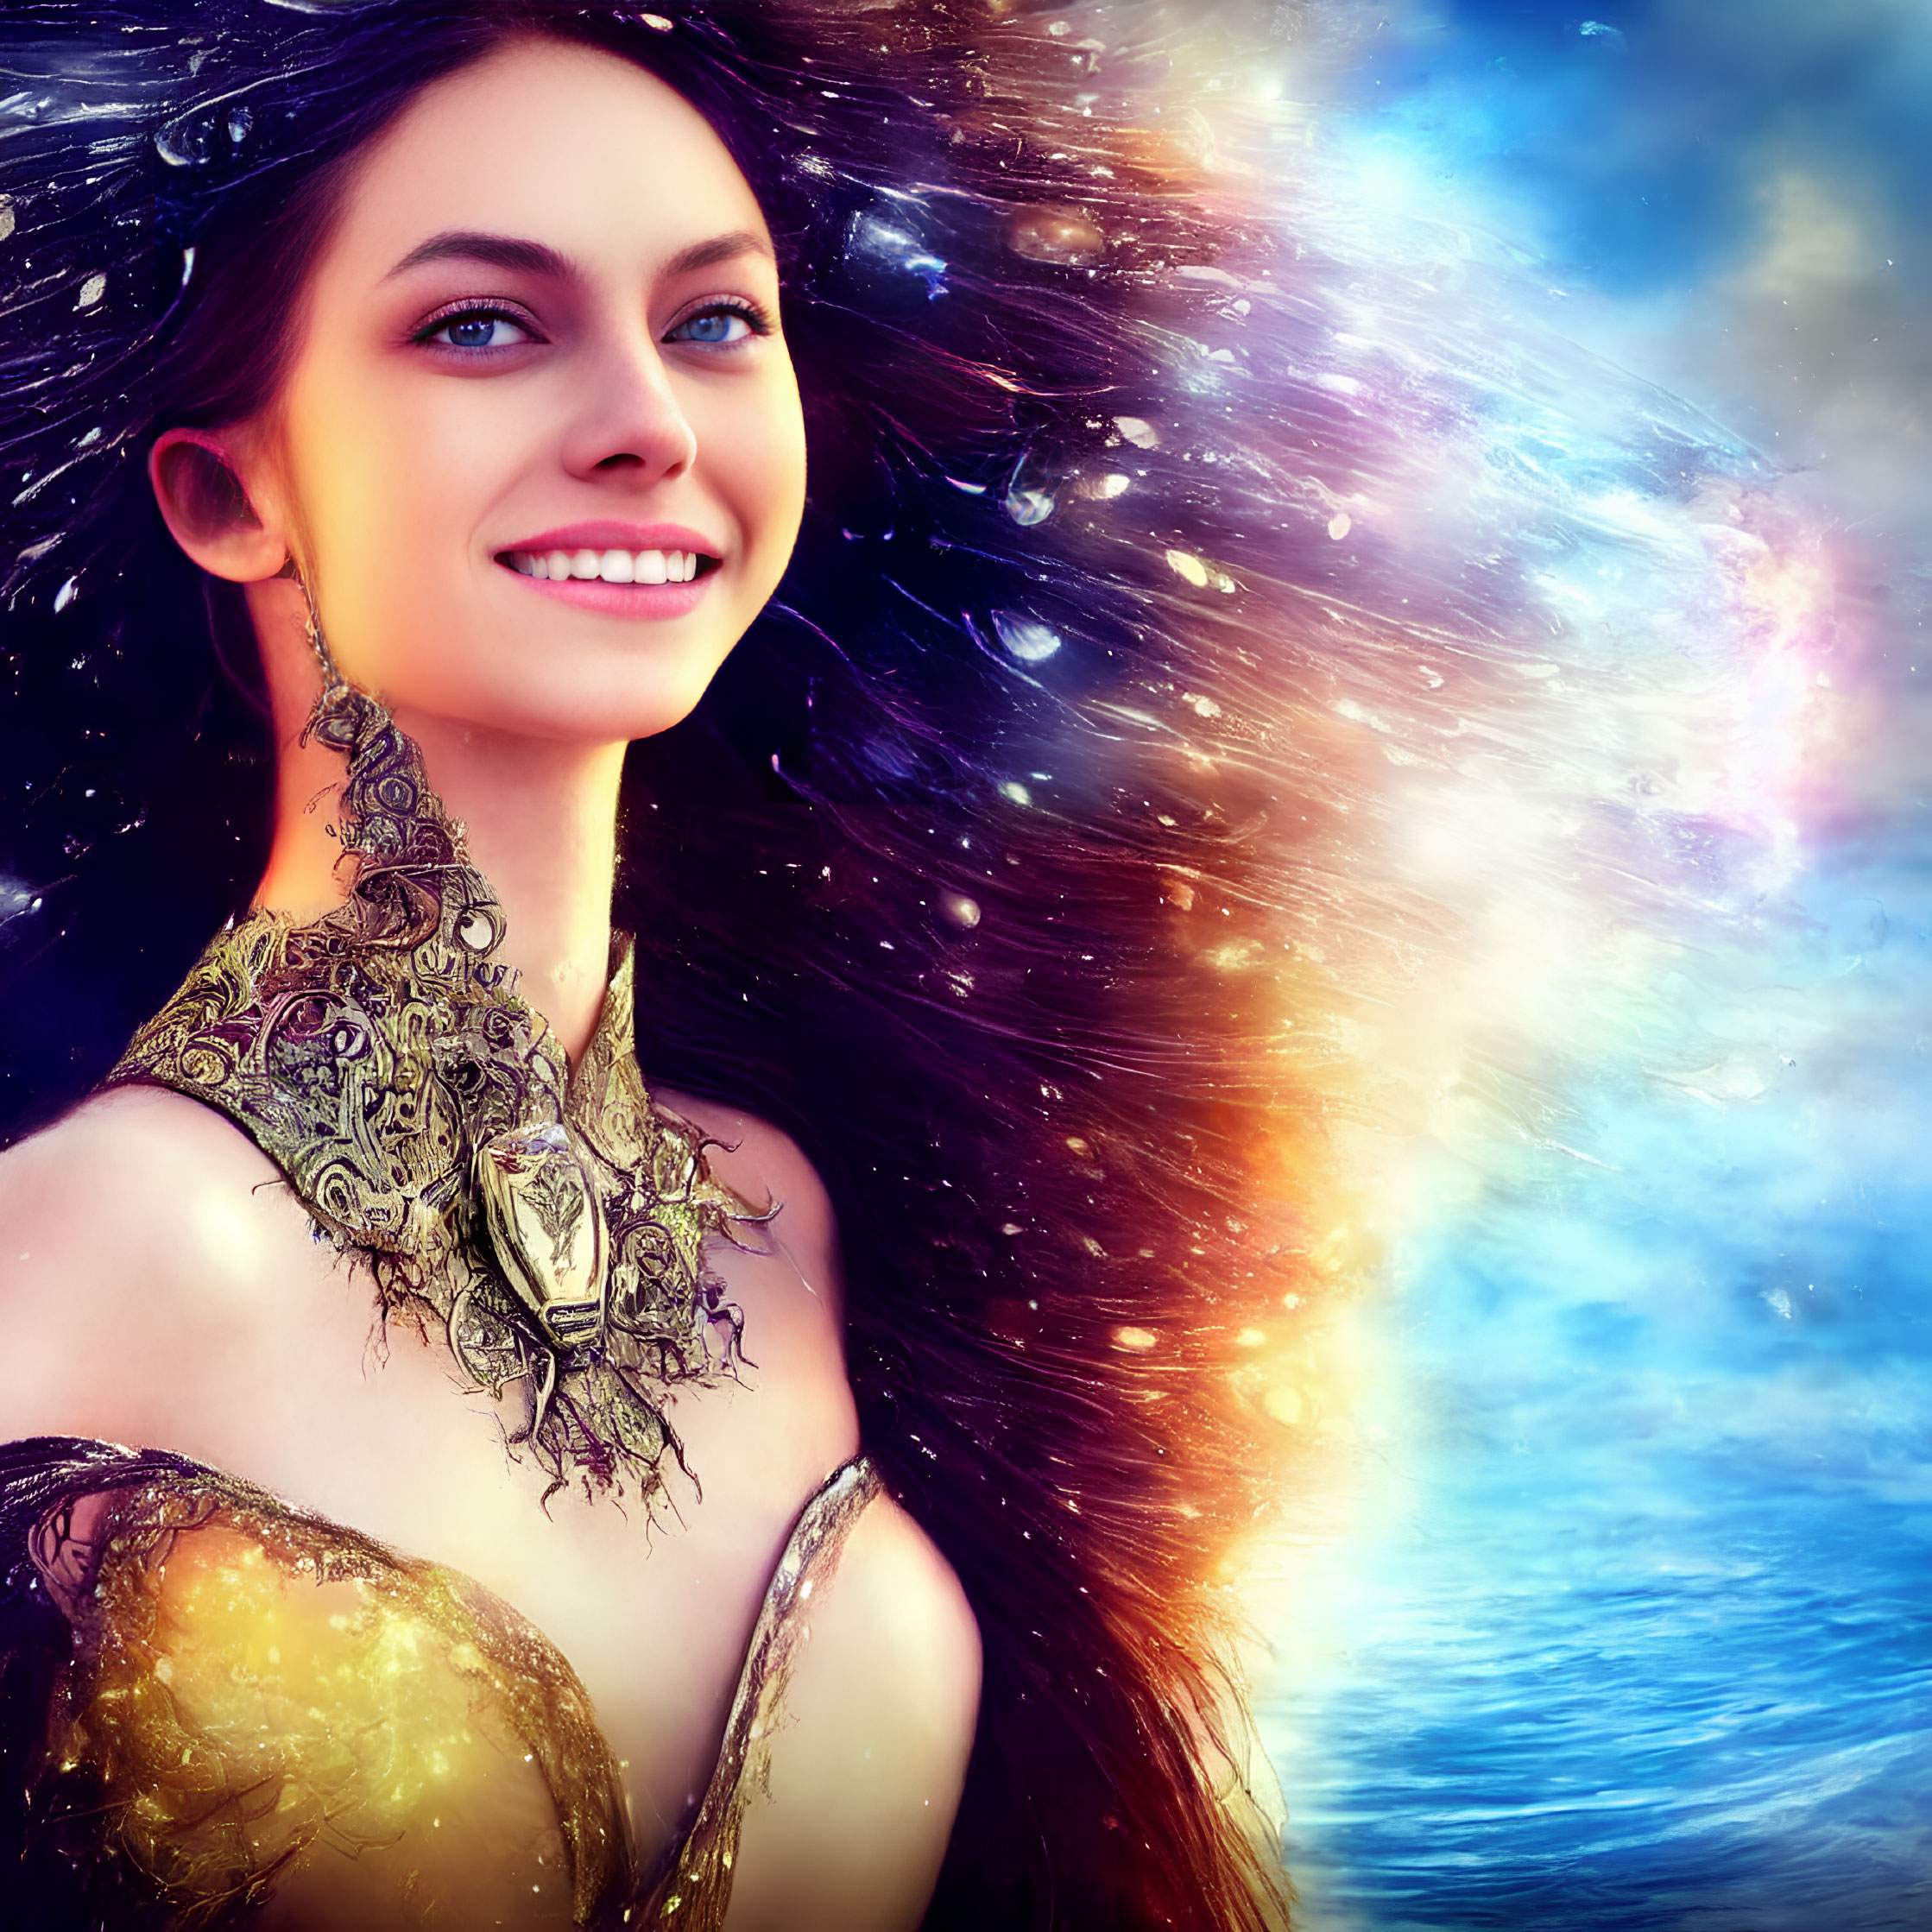 Digital artwork: Smiling woman with flowing hair in cosmic background and ornate golden shoulder armor.